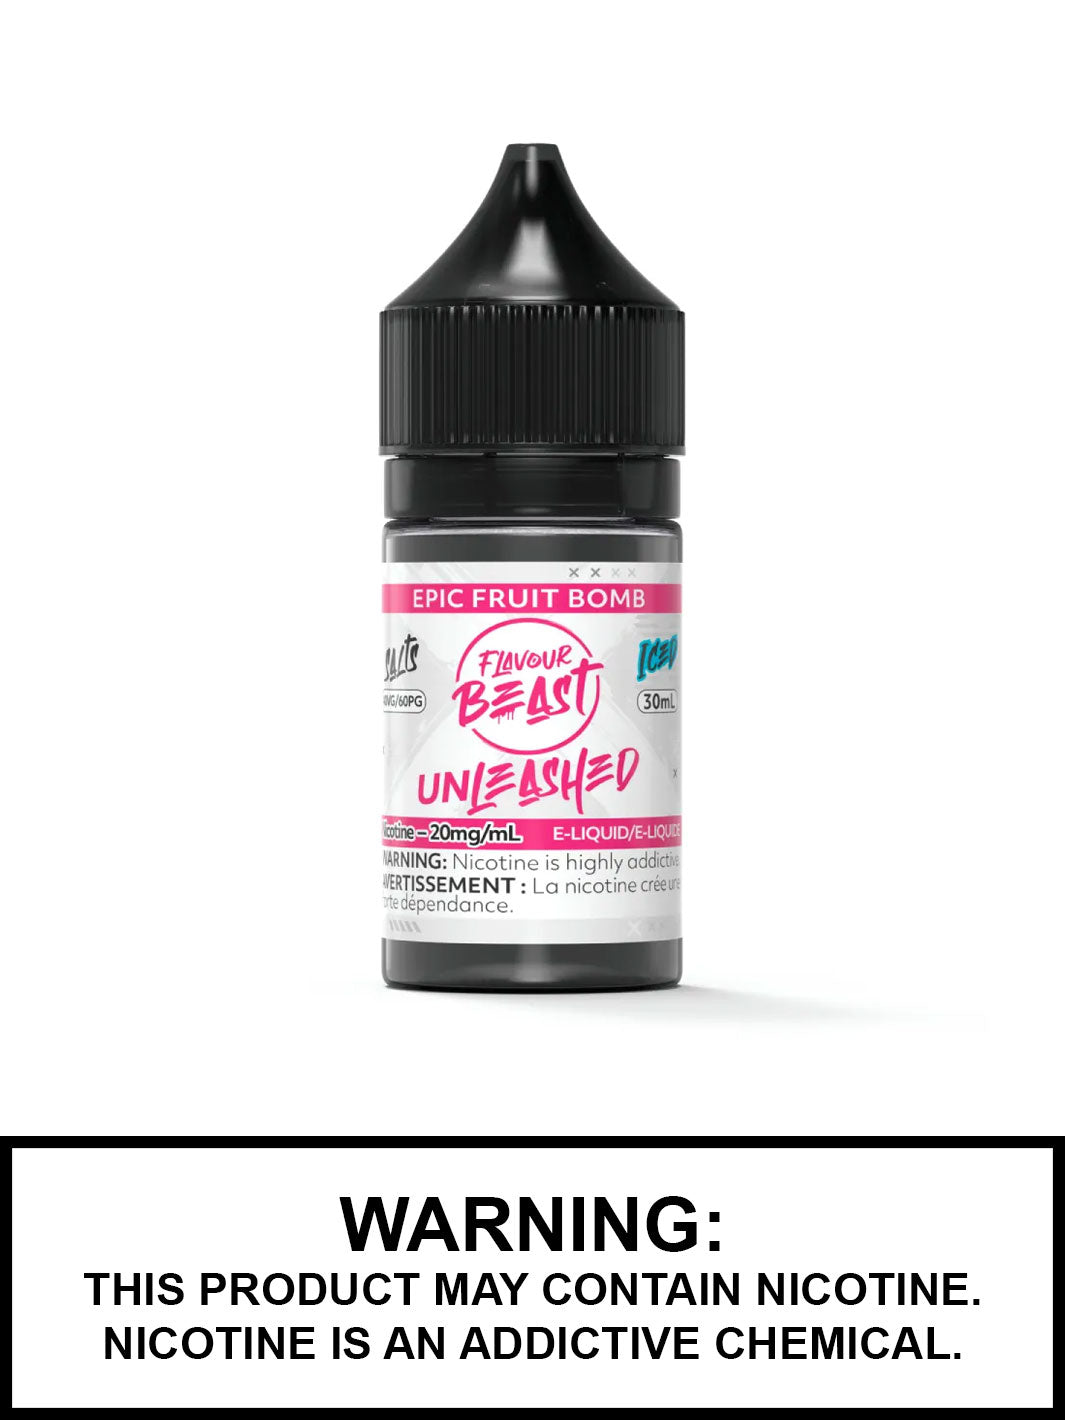 Epic Fruit Bomb Iced Flavour Beast Unleashed Salts, Salt Nic Flavour Beast Flavours, Vape360 Canada